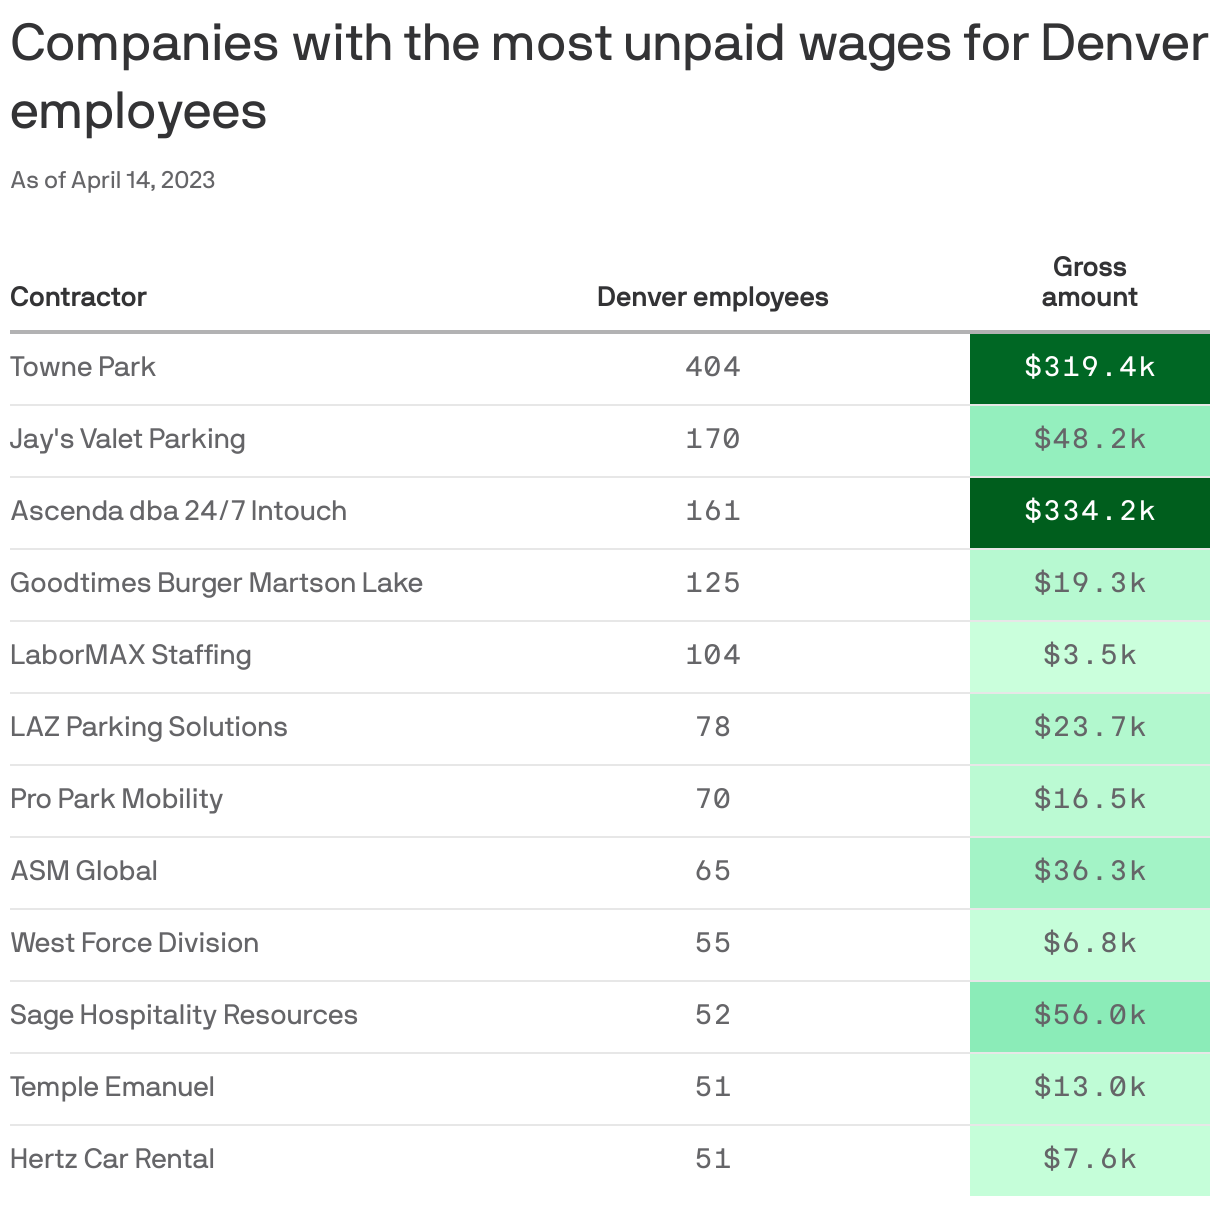 Companies with the most unpaid wages for Denver employees